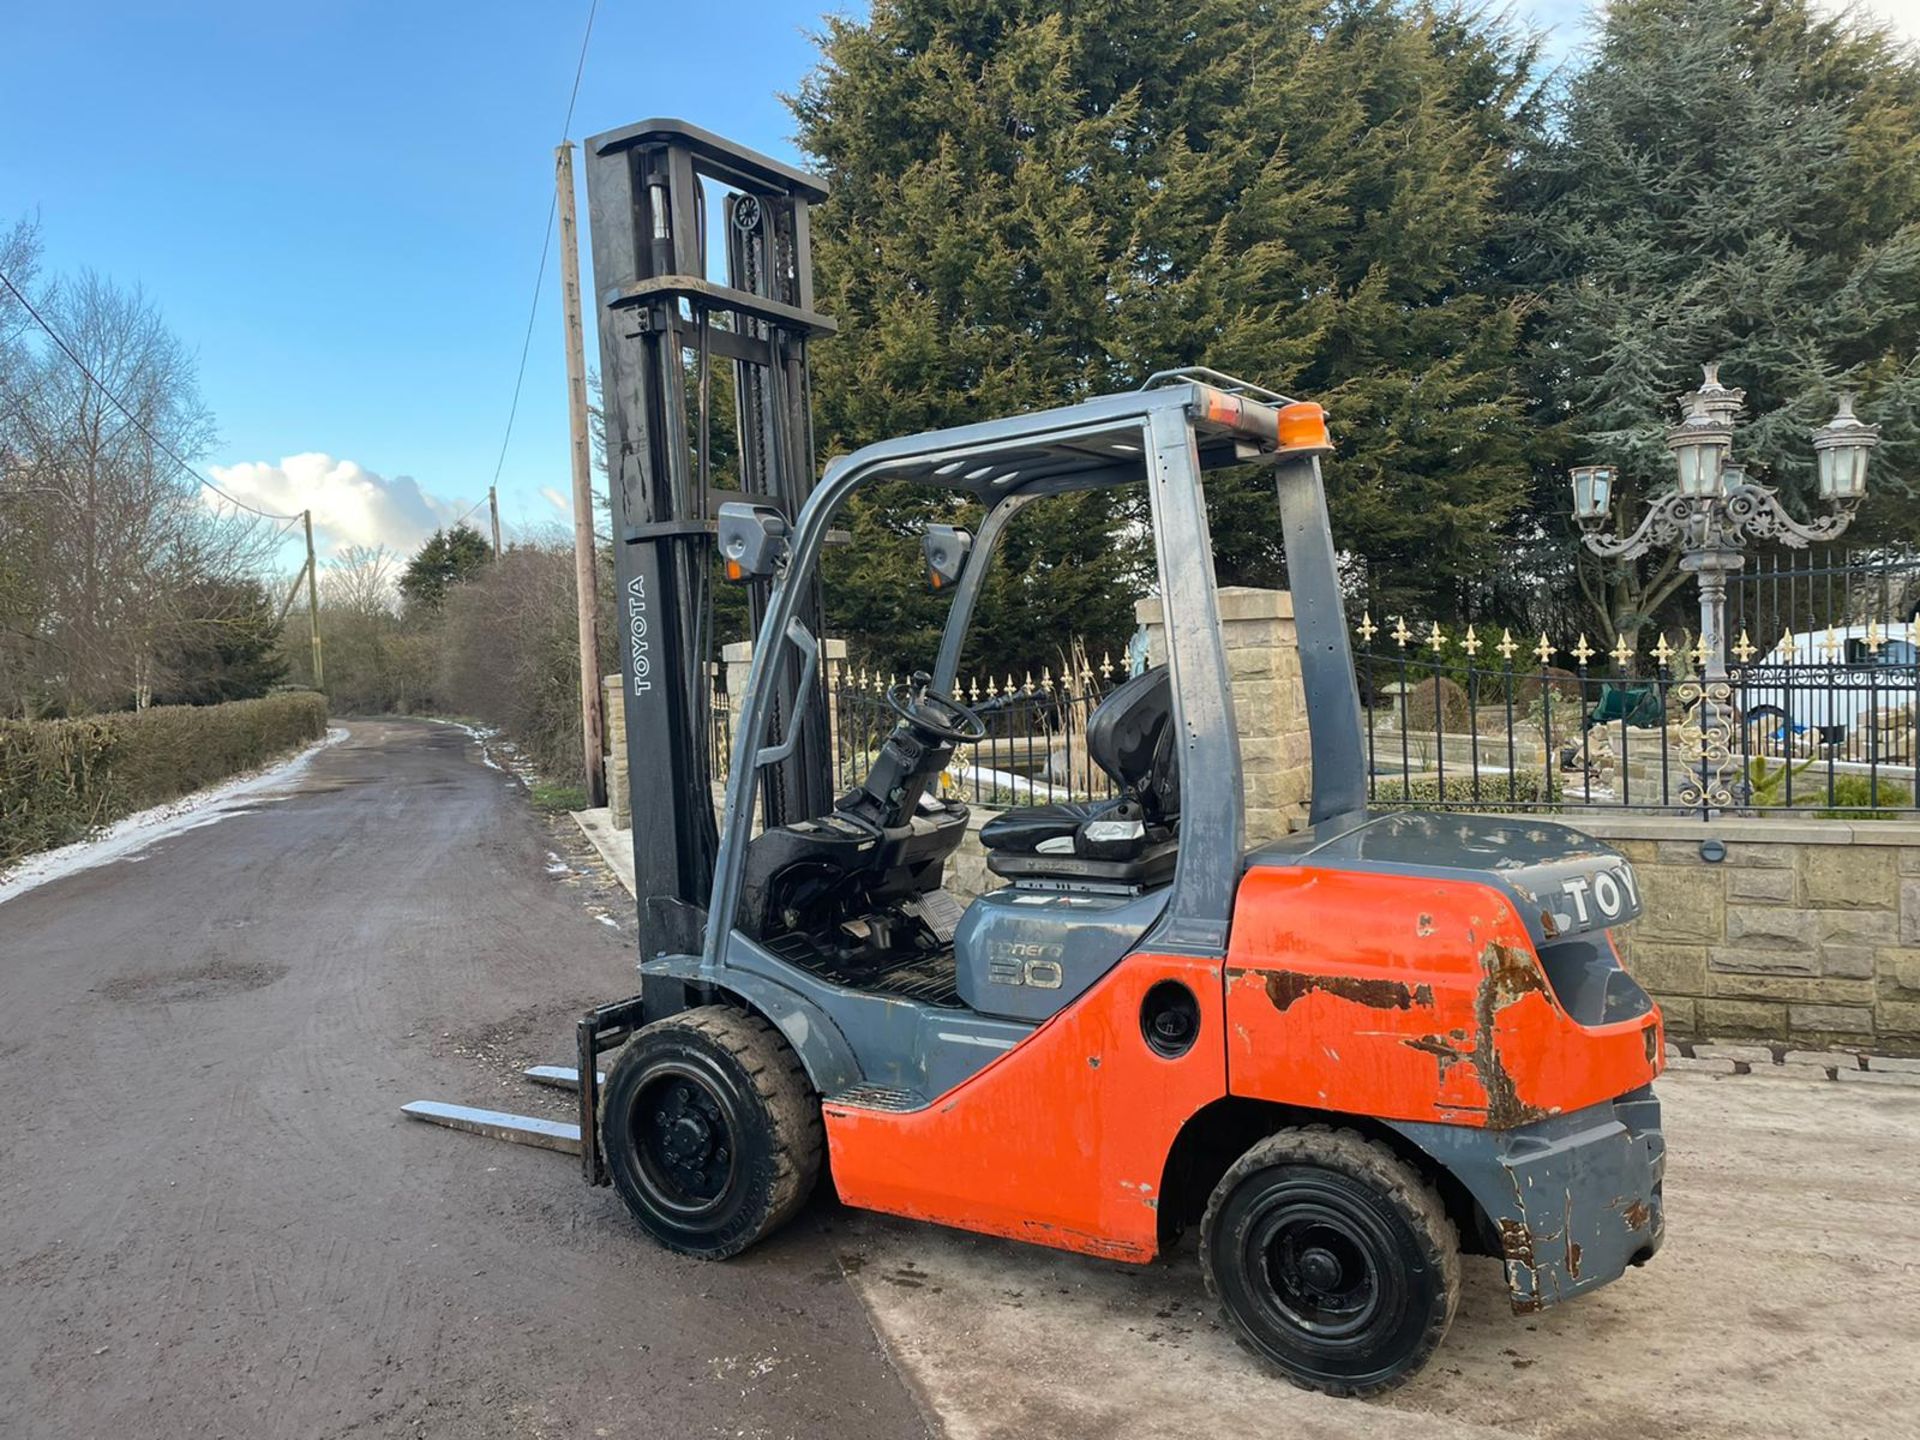 2013 TOYOTA TONERO 30 FORKLIFT, RUNS, DRIVES AND LIFTS, LOW 4720 HOURS *PLUS VAT* - Image 3 of 9